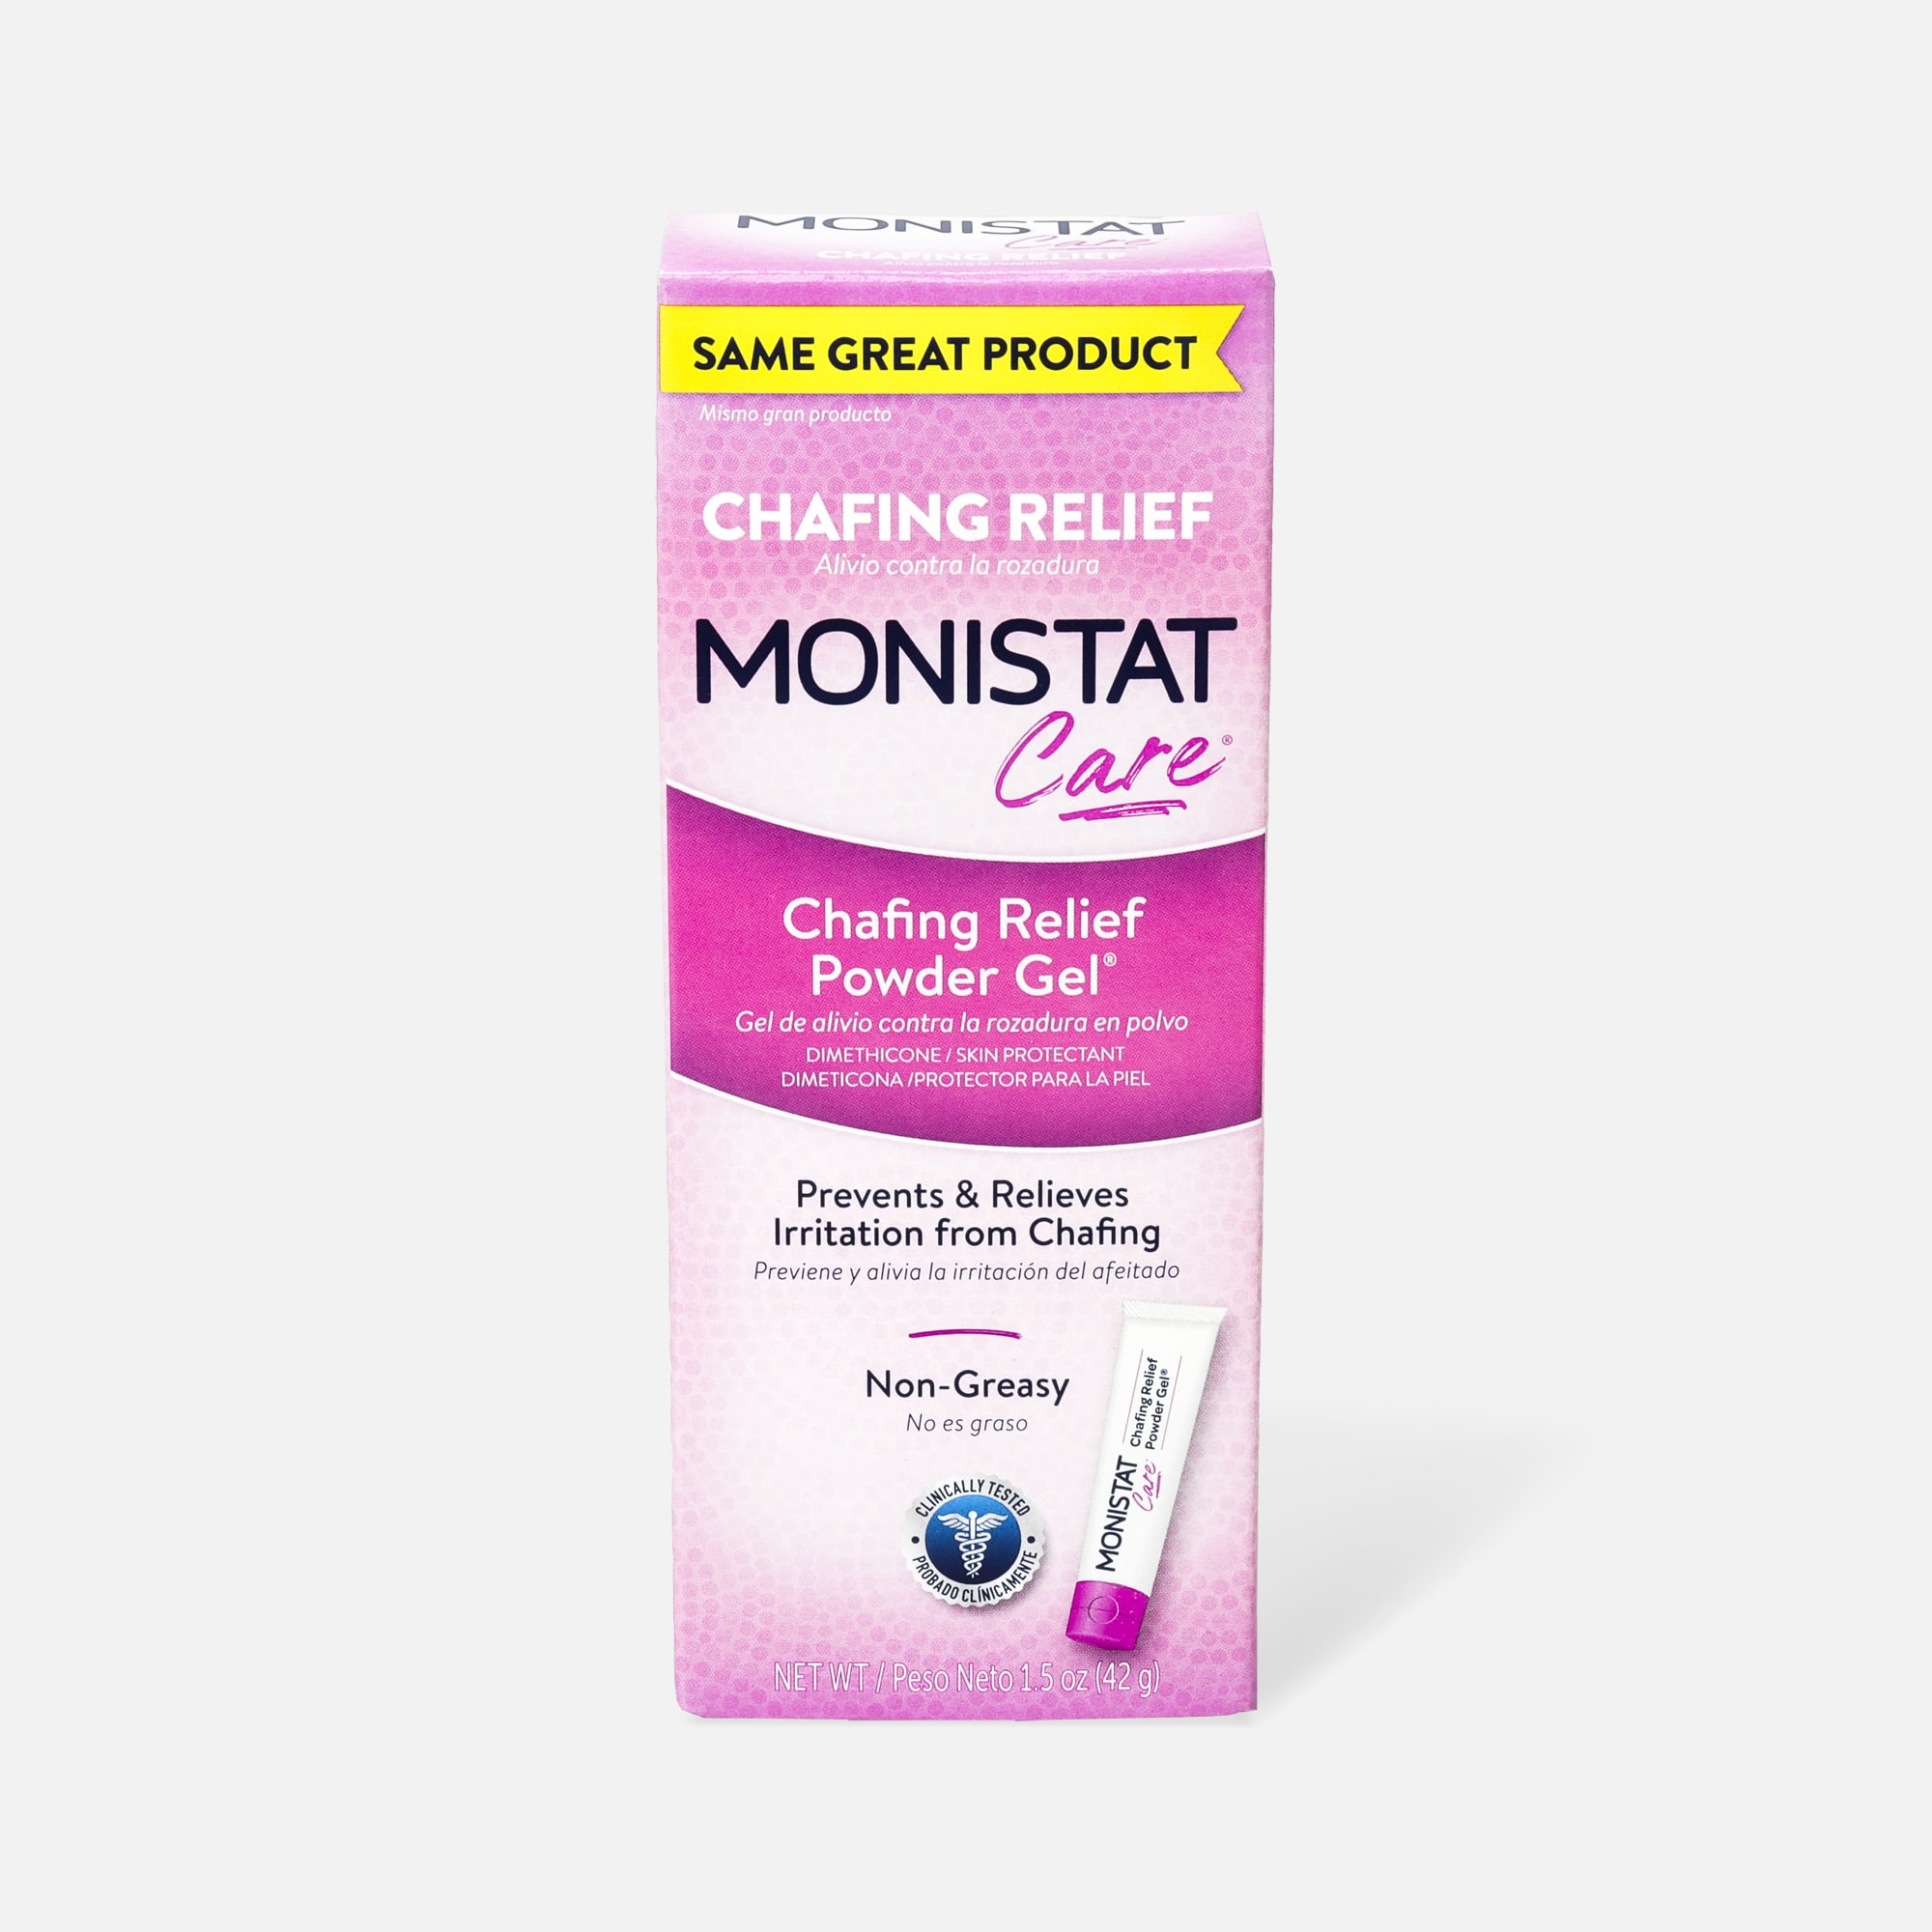 MONISTAT Complete Care Chafing Relief Powder Gel 1.5 oz (Pack of 3) 